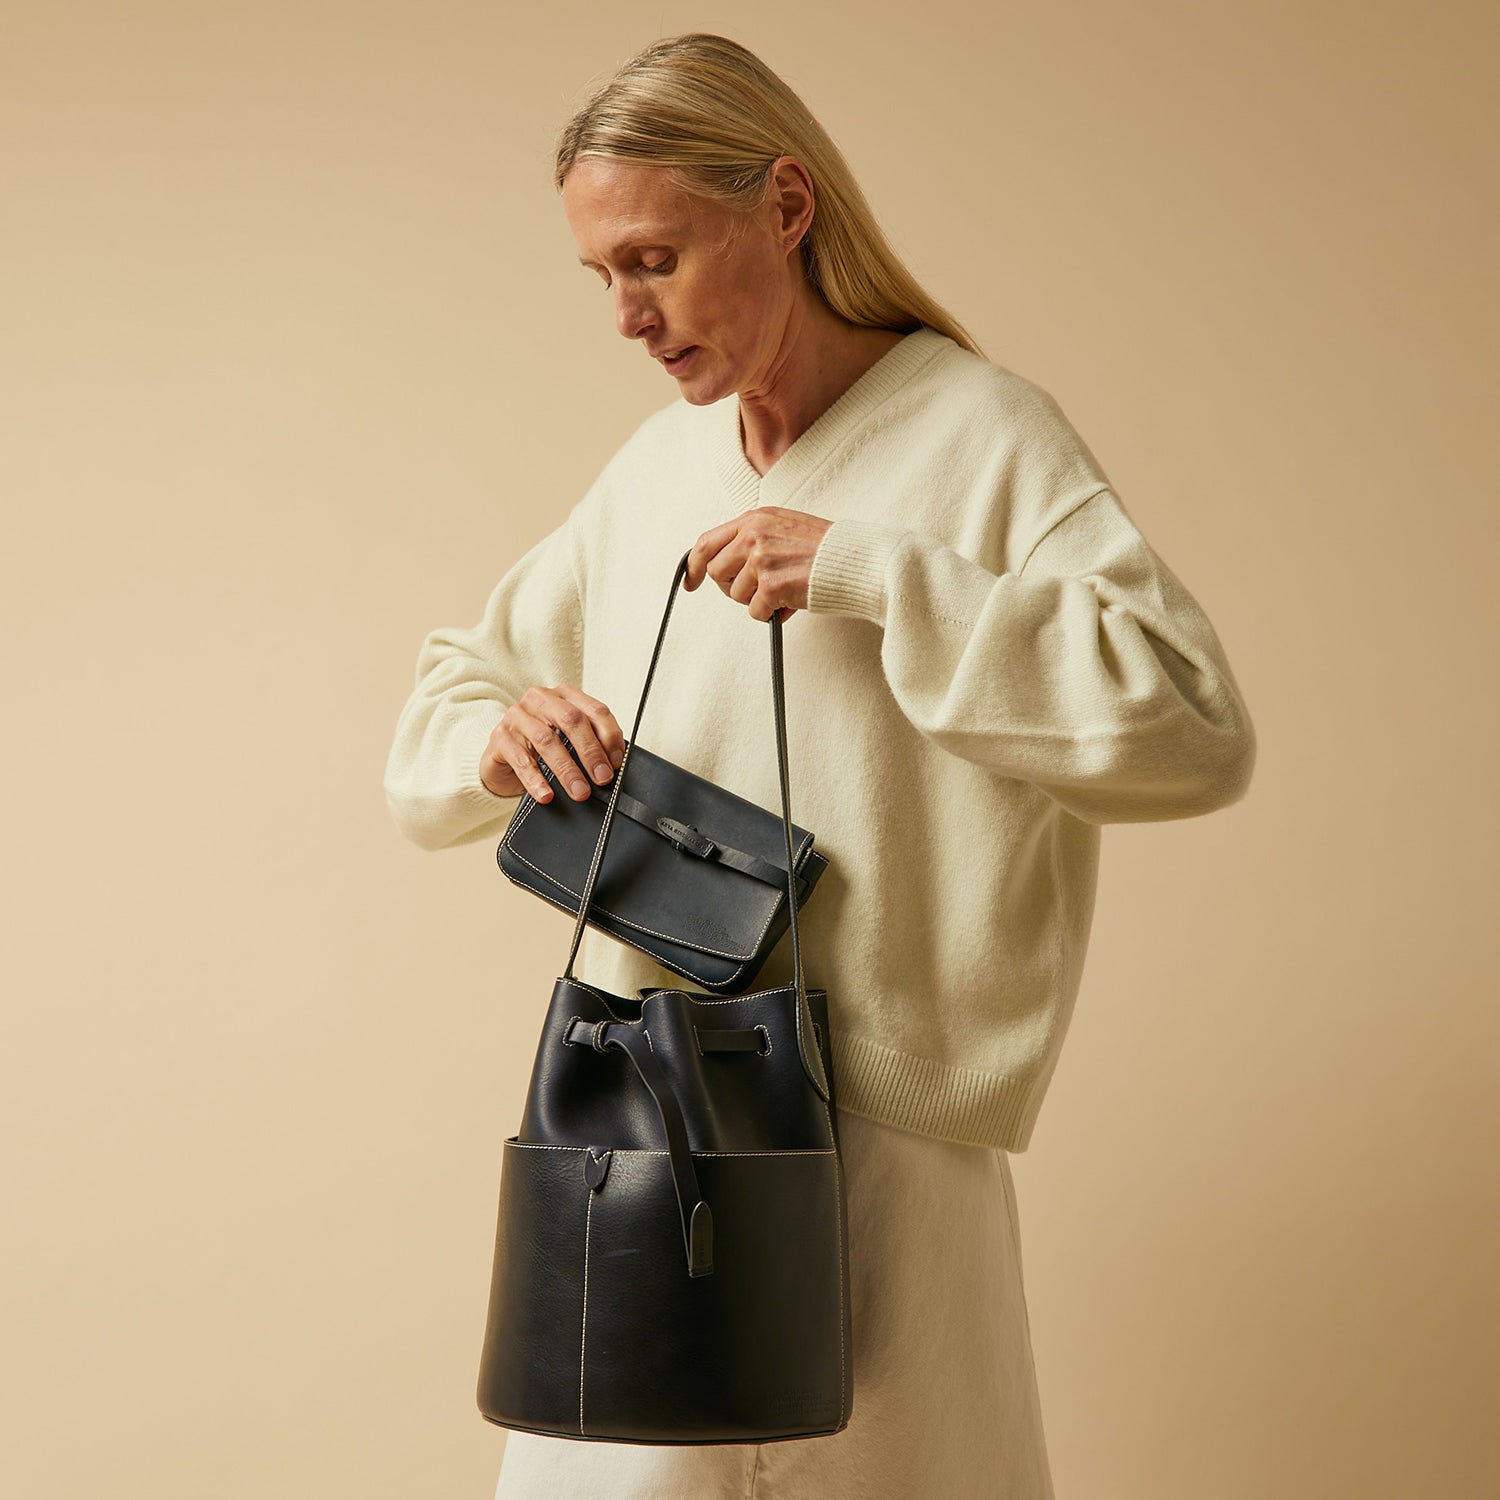 Return to Nature Bucket Bag -

                  
                    Compostable Leather in Marine -
                  

                  Anya Hindmarch EU
